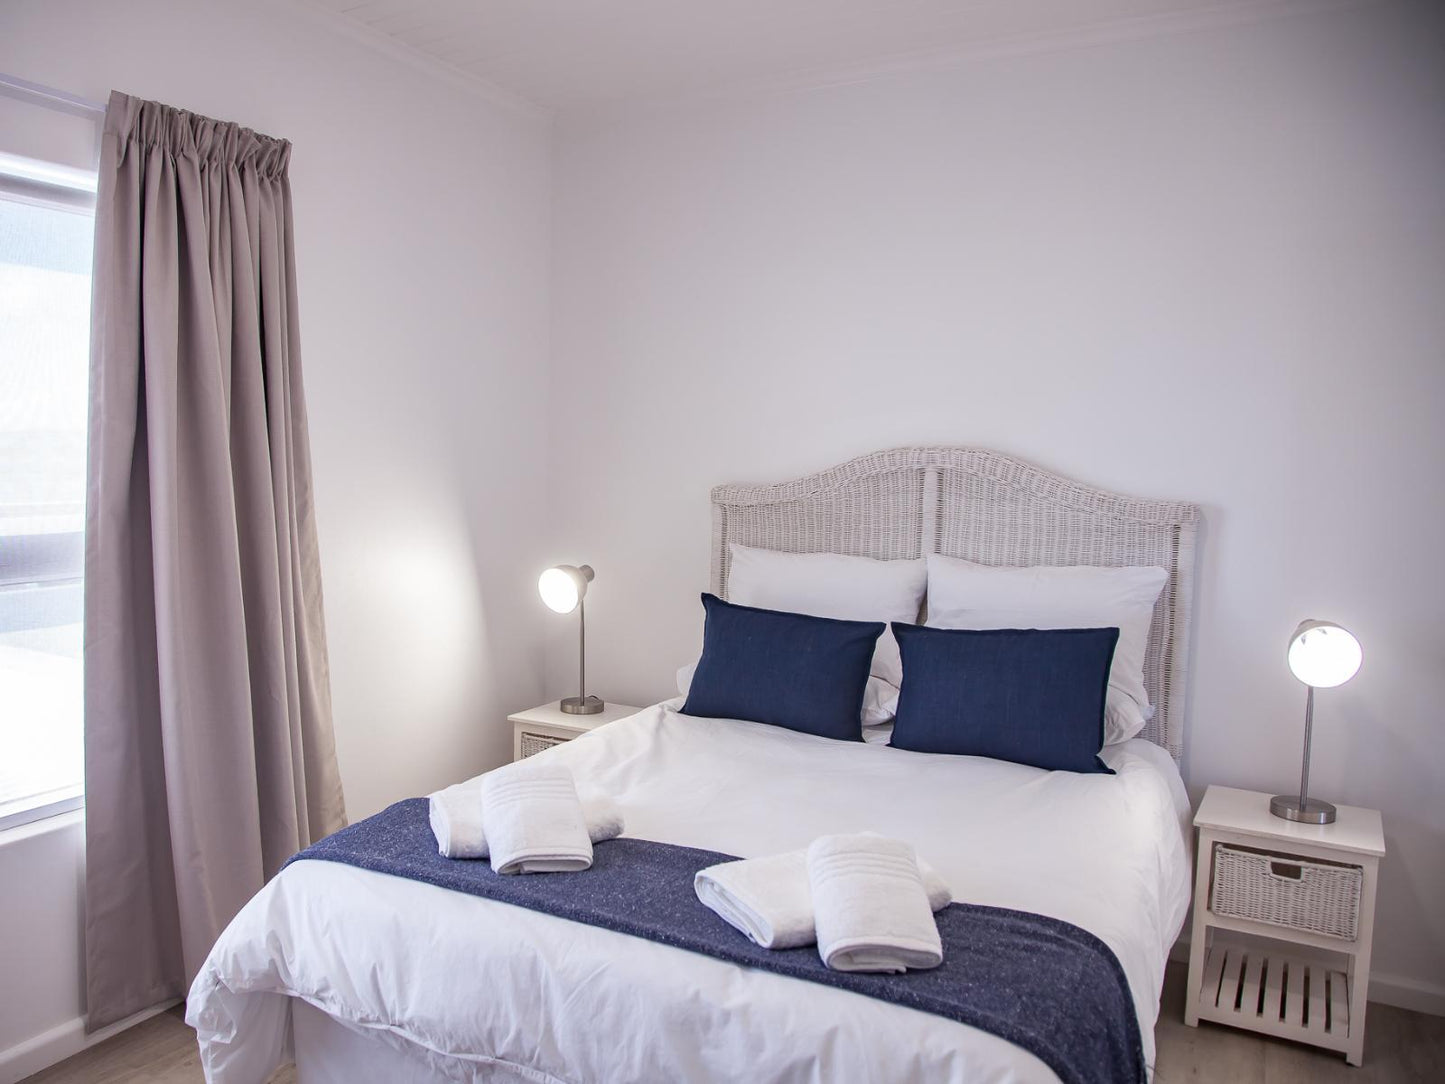 3 Bedroom Apartments @ Simply Yzer Self Catering Apartments